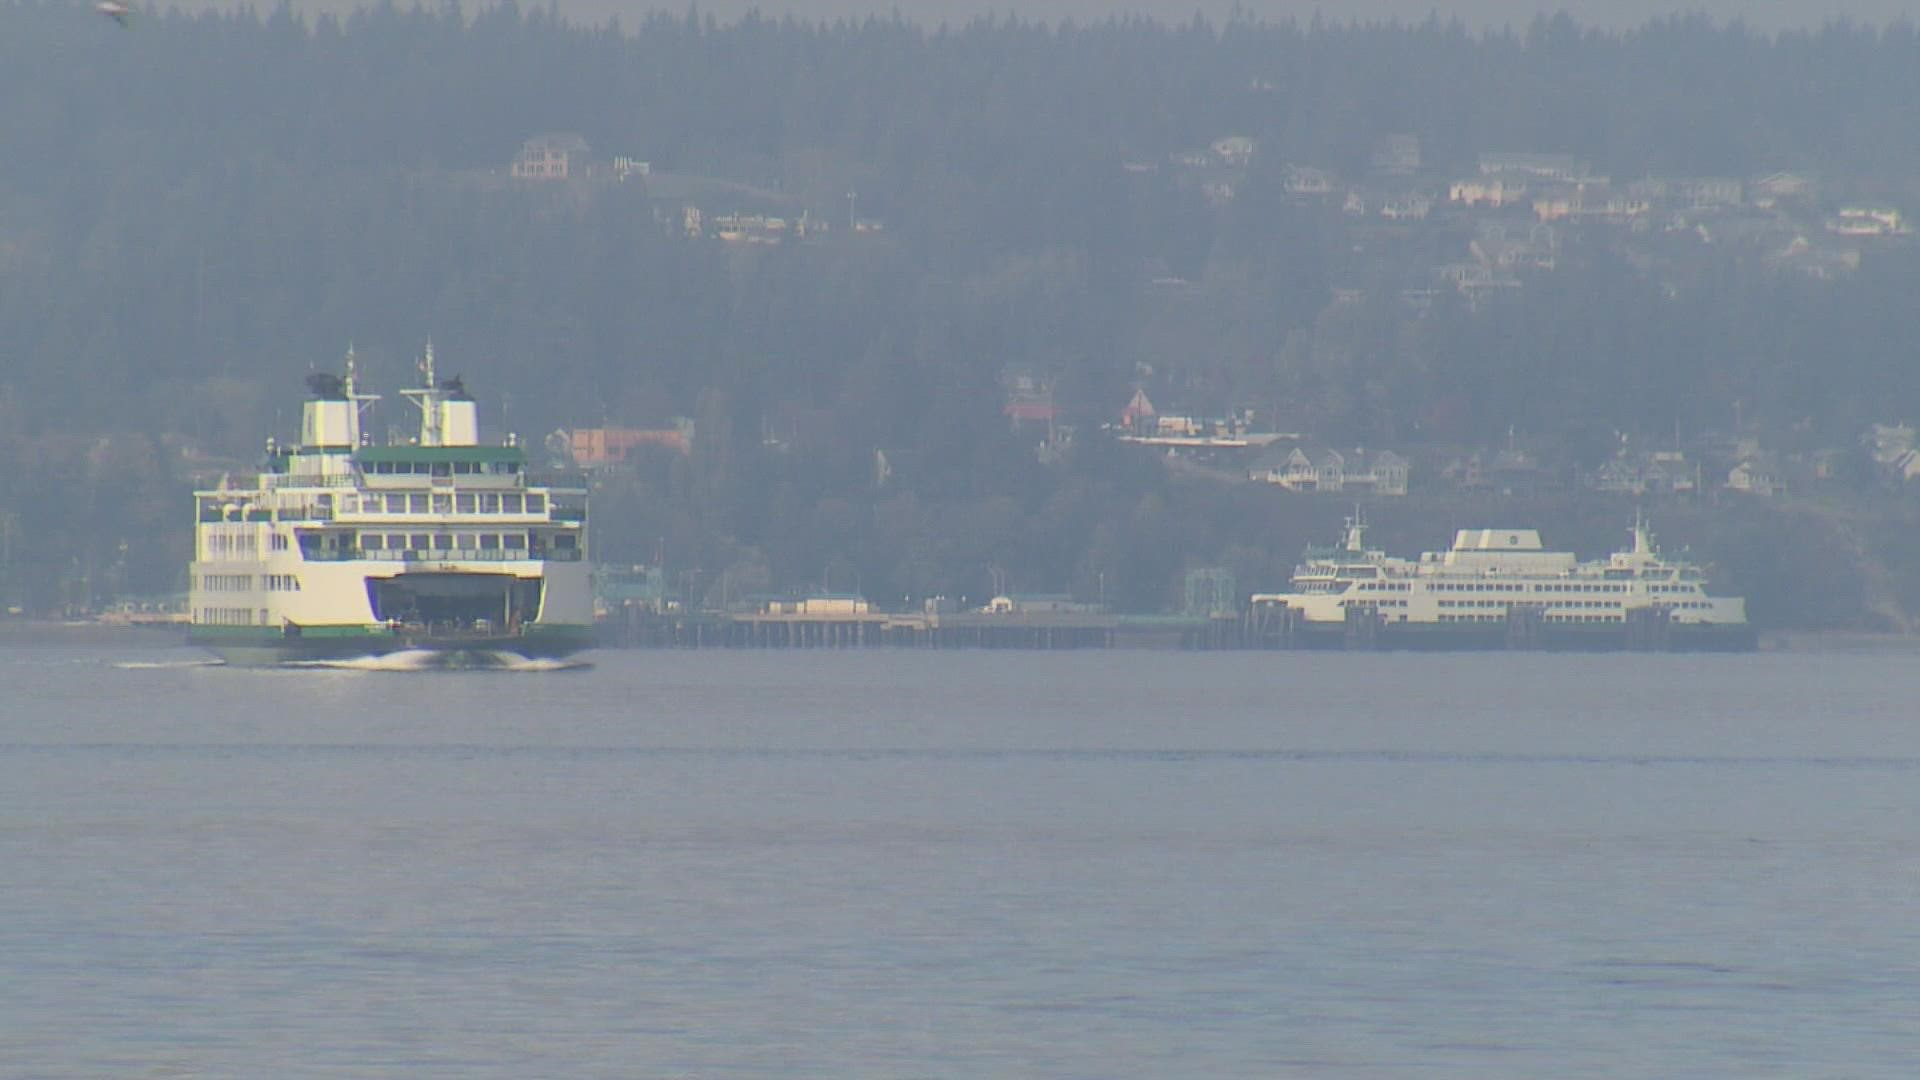 About 170 ferry crossings were canceled system-wide Friday, and it comes after days of disruptions for Washington State Ferries.